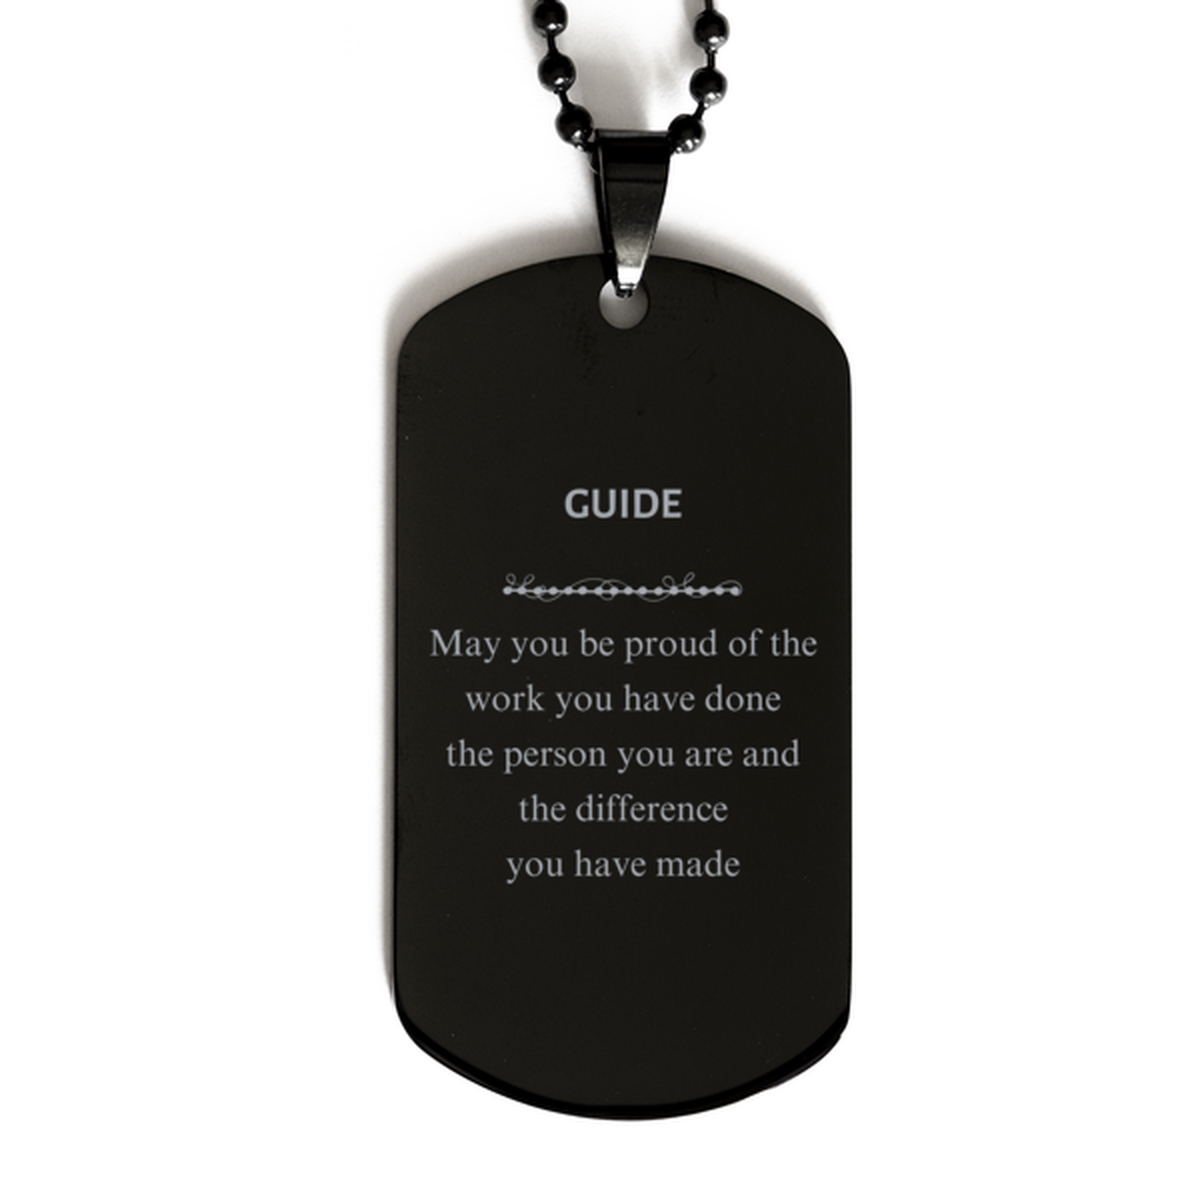 Guide May you be proud of the work you have done, Retirement Guide Black Dog Tag for Colleague Appreciation Gifts Amazing for Guide